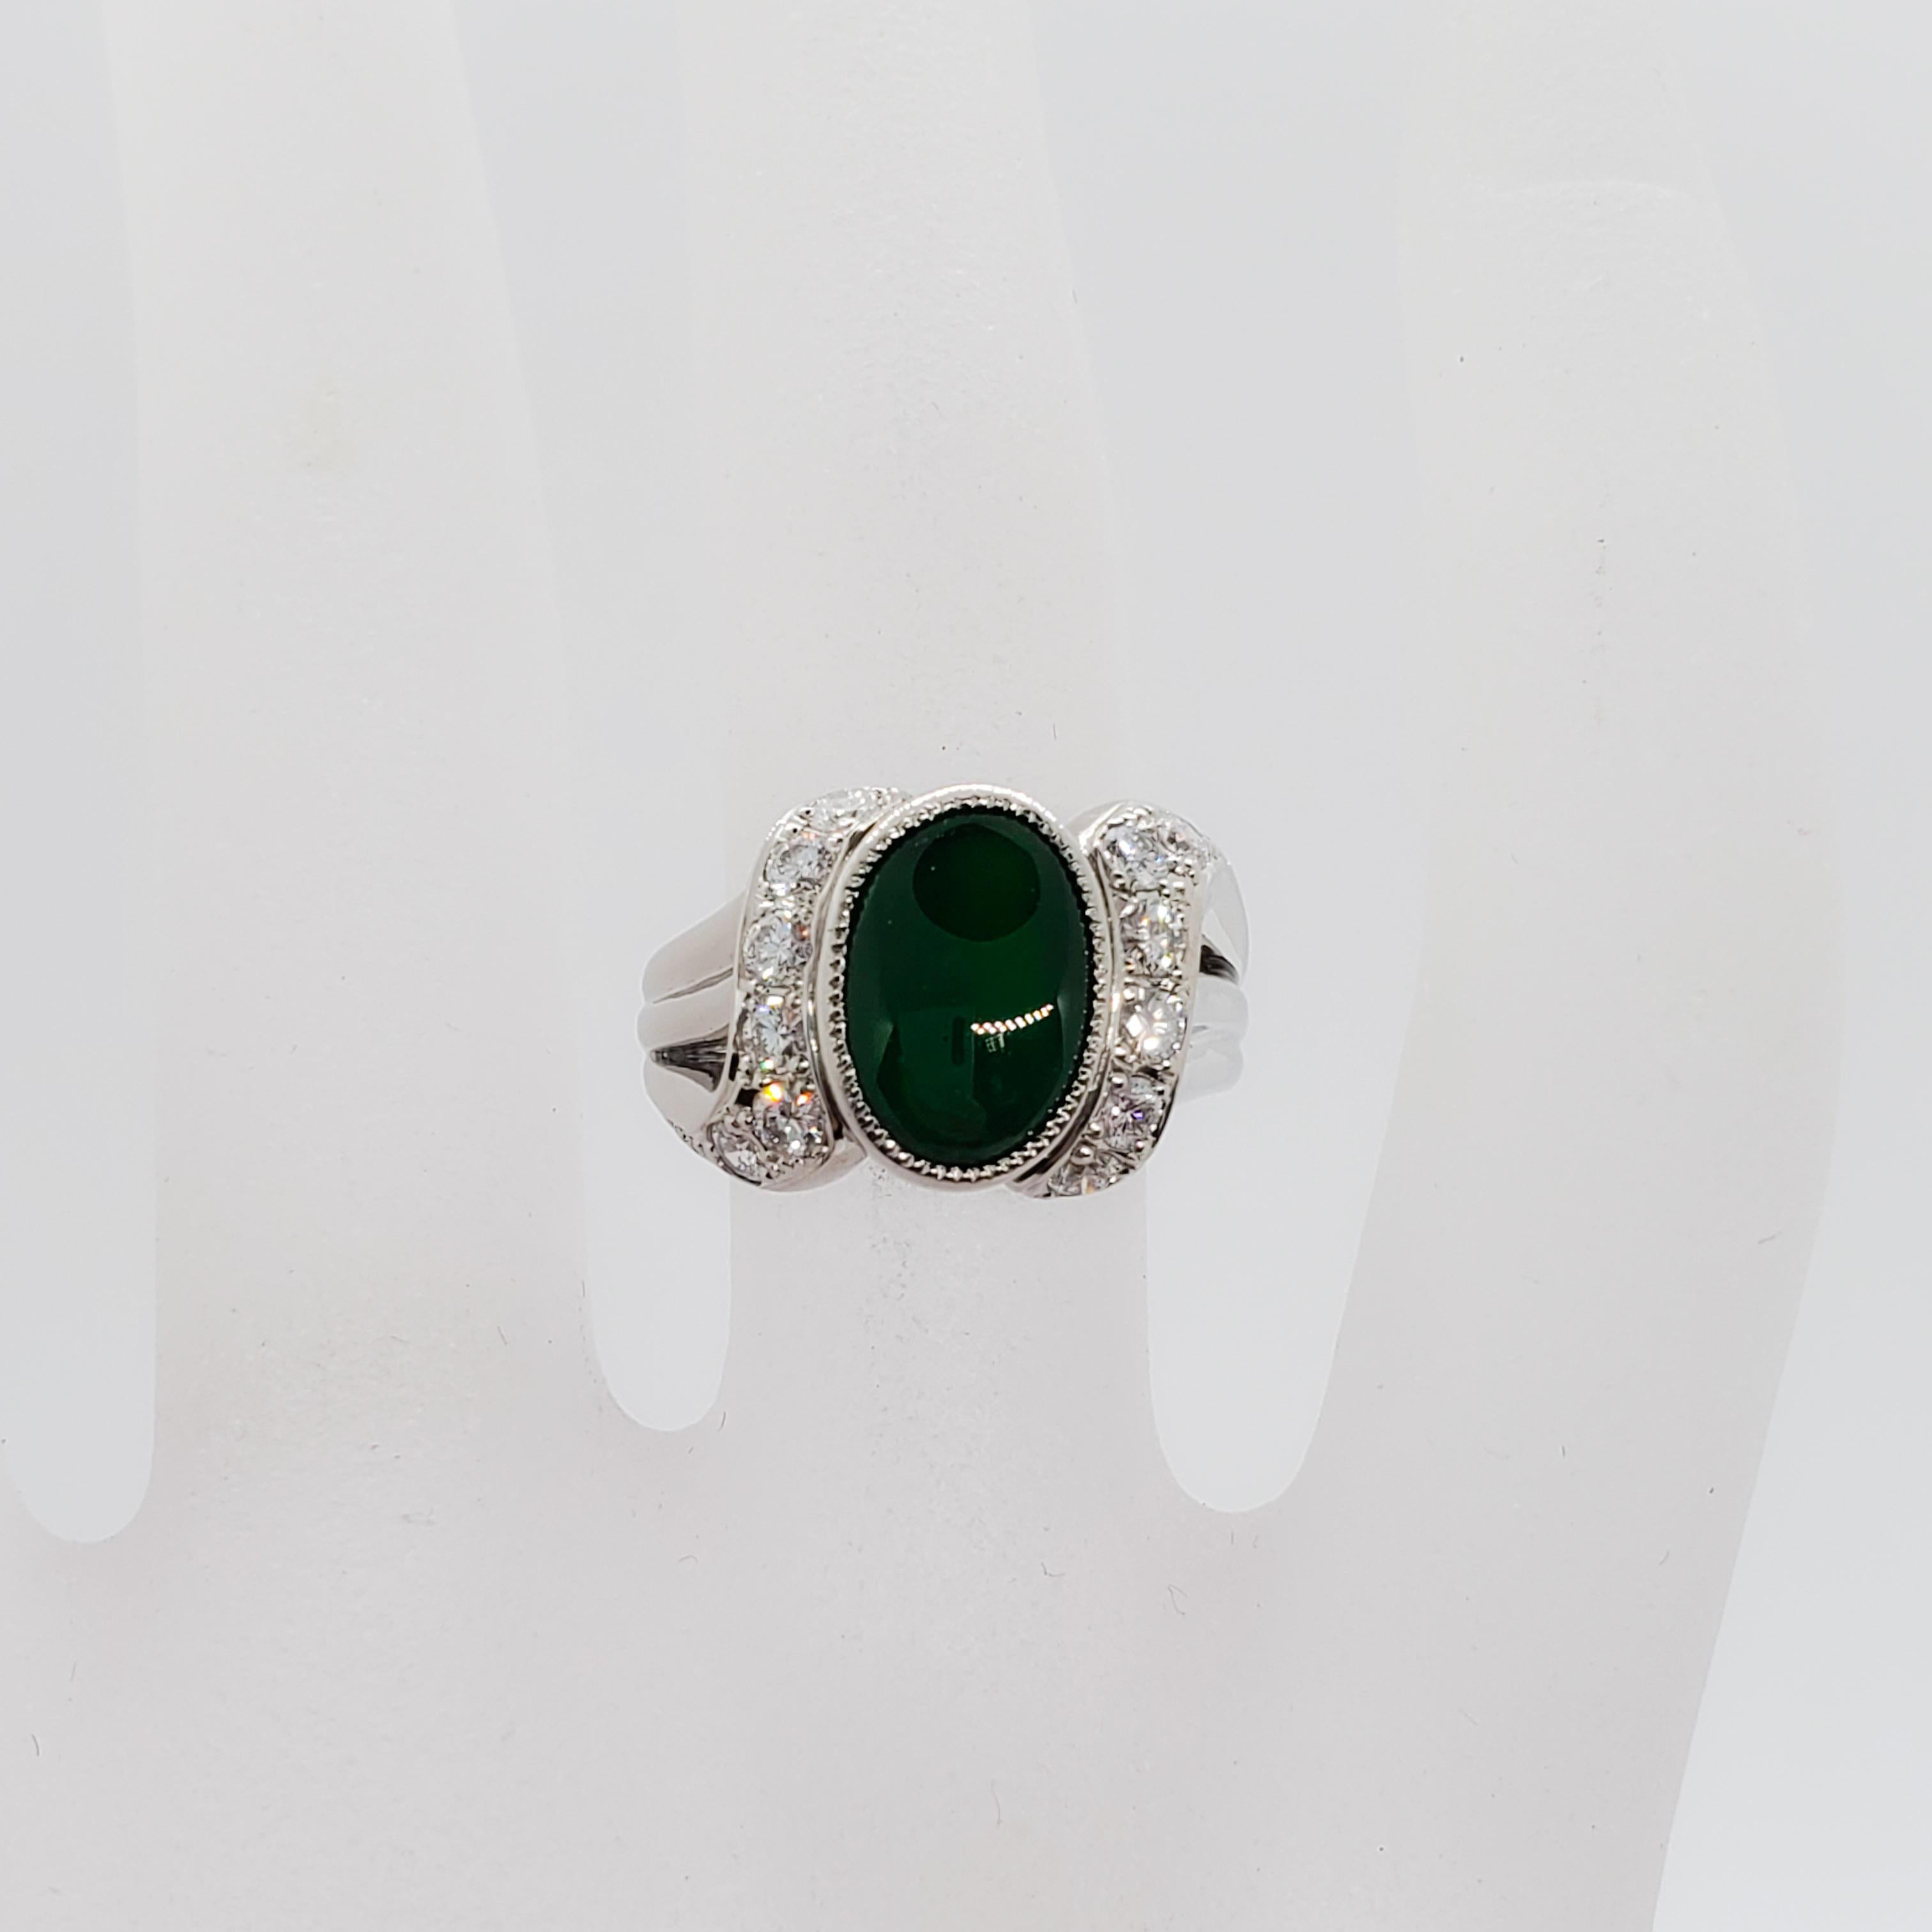 Beautiful deep green 3.10 ct oval cabochon jade with 0.48 cts of white and bright diamond rounds in a handmade platinum mounting. Ring size is 5.75 with approximately 9.50 grams of metal. Excellent condition.